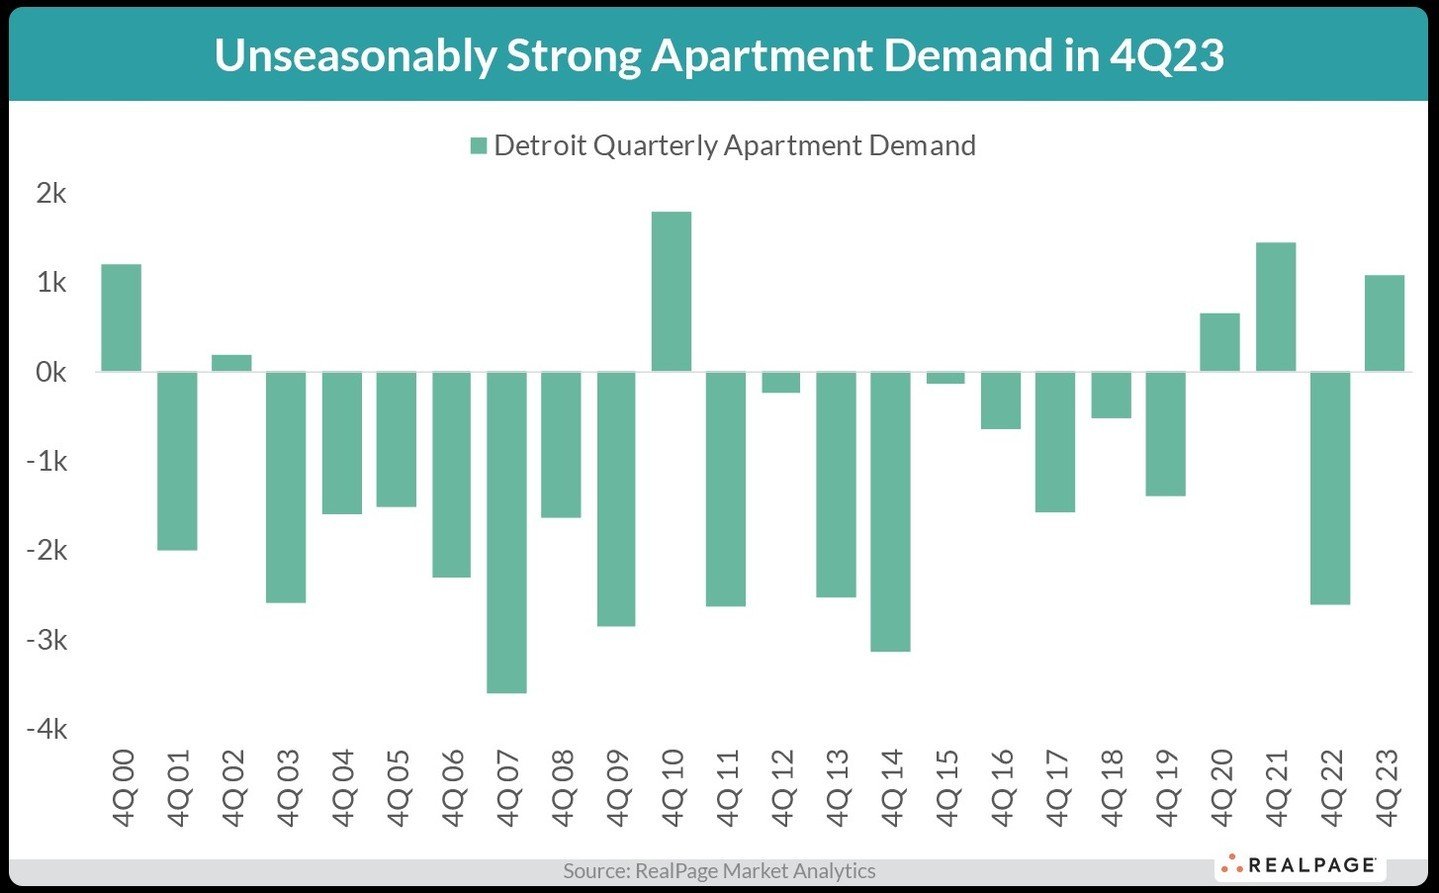 According to RealPage Analytics, there's a notable shift in apartment demand in Detroit during the fourth quarter of 2023, which traditionally experiences low demand and net move-outs. However, 2023 saw a significant change with approximately 1,100 u